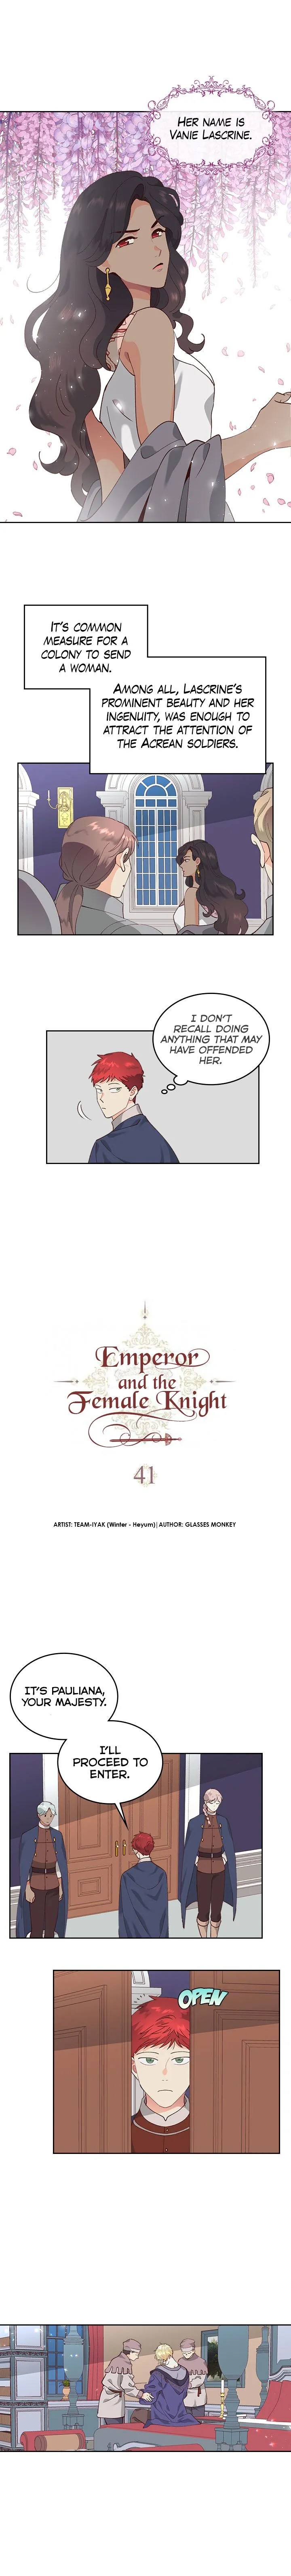 Emperor And The Female Knight - Chapter 41 Page 1